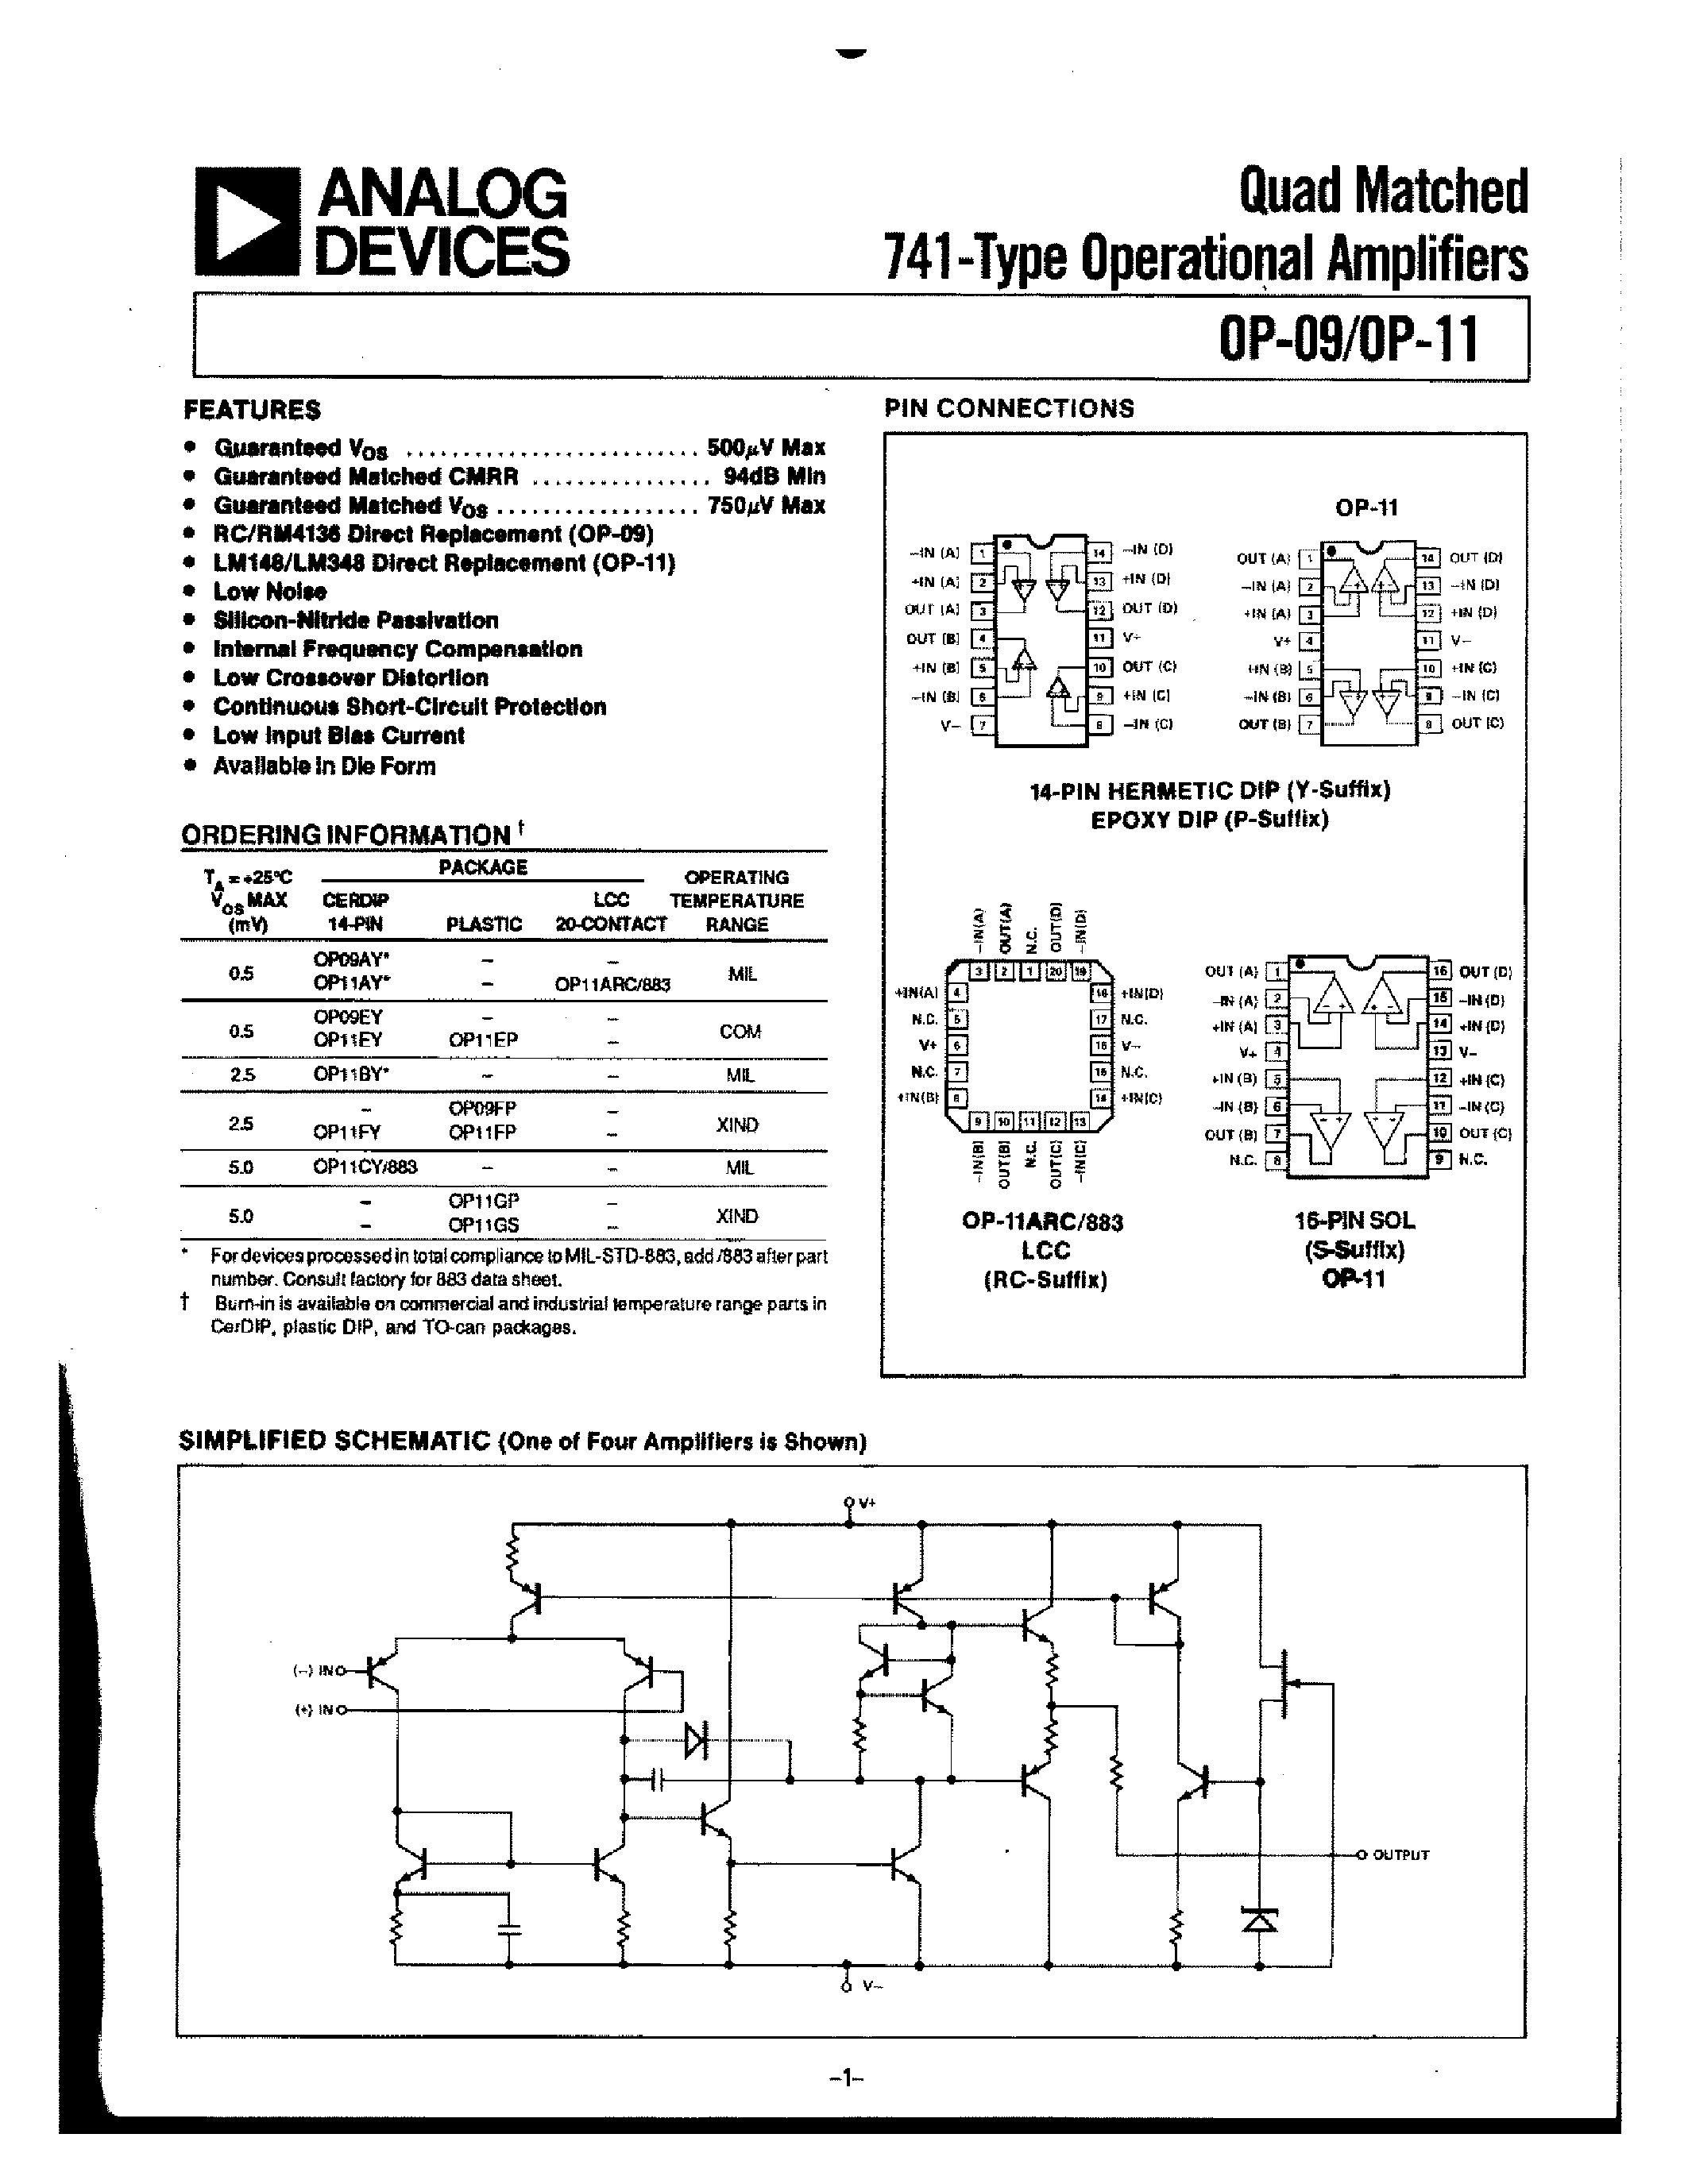 Datasheet OP-09 - Quad Matched 741-Type Operational Amplifiers page 1